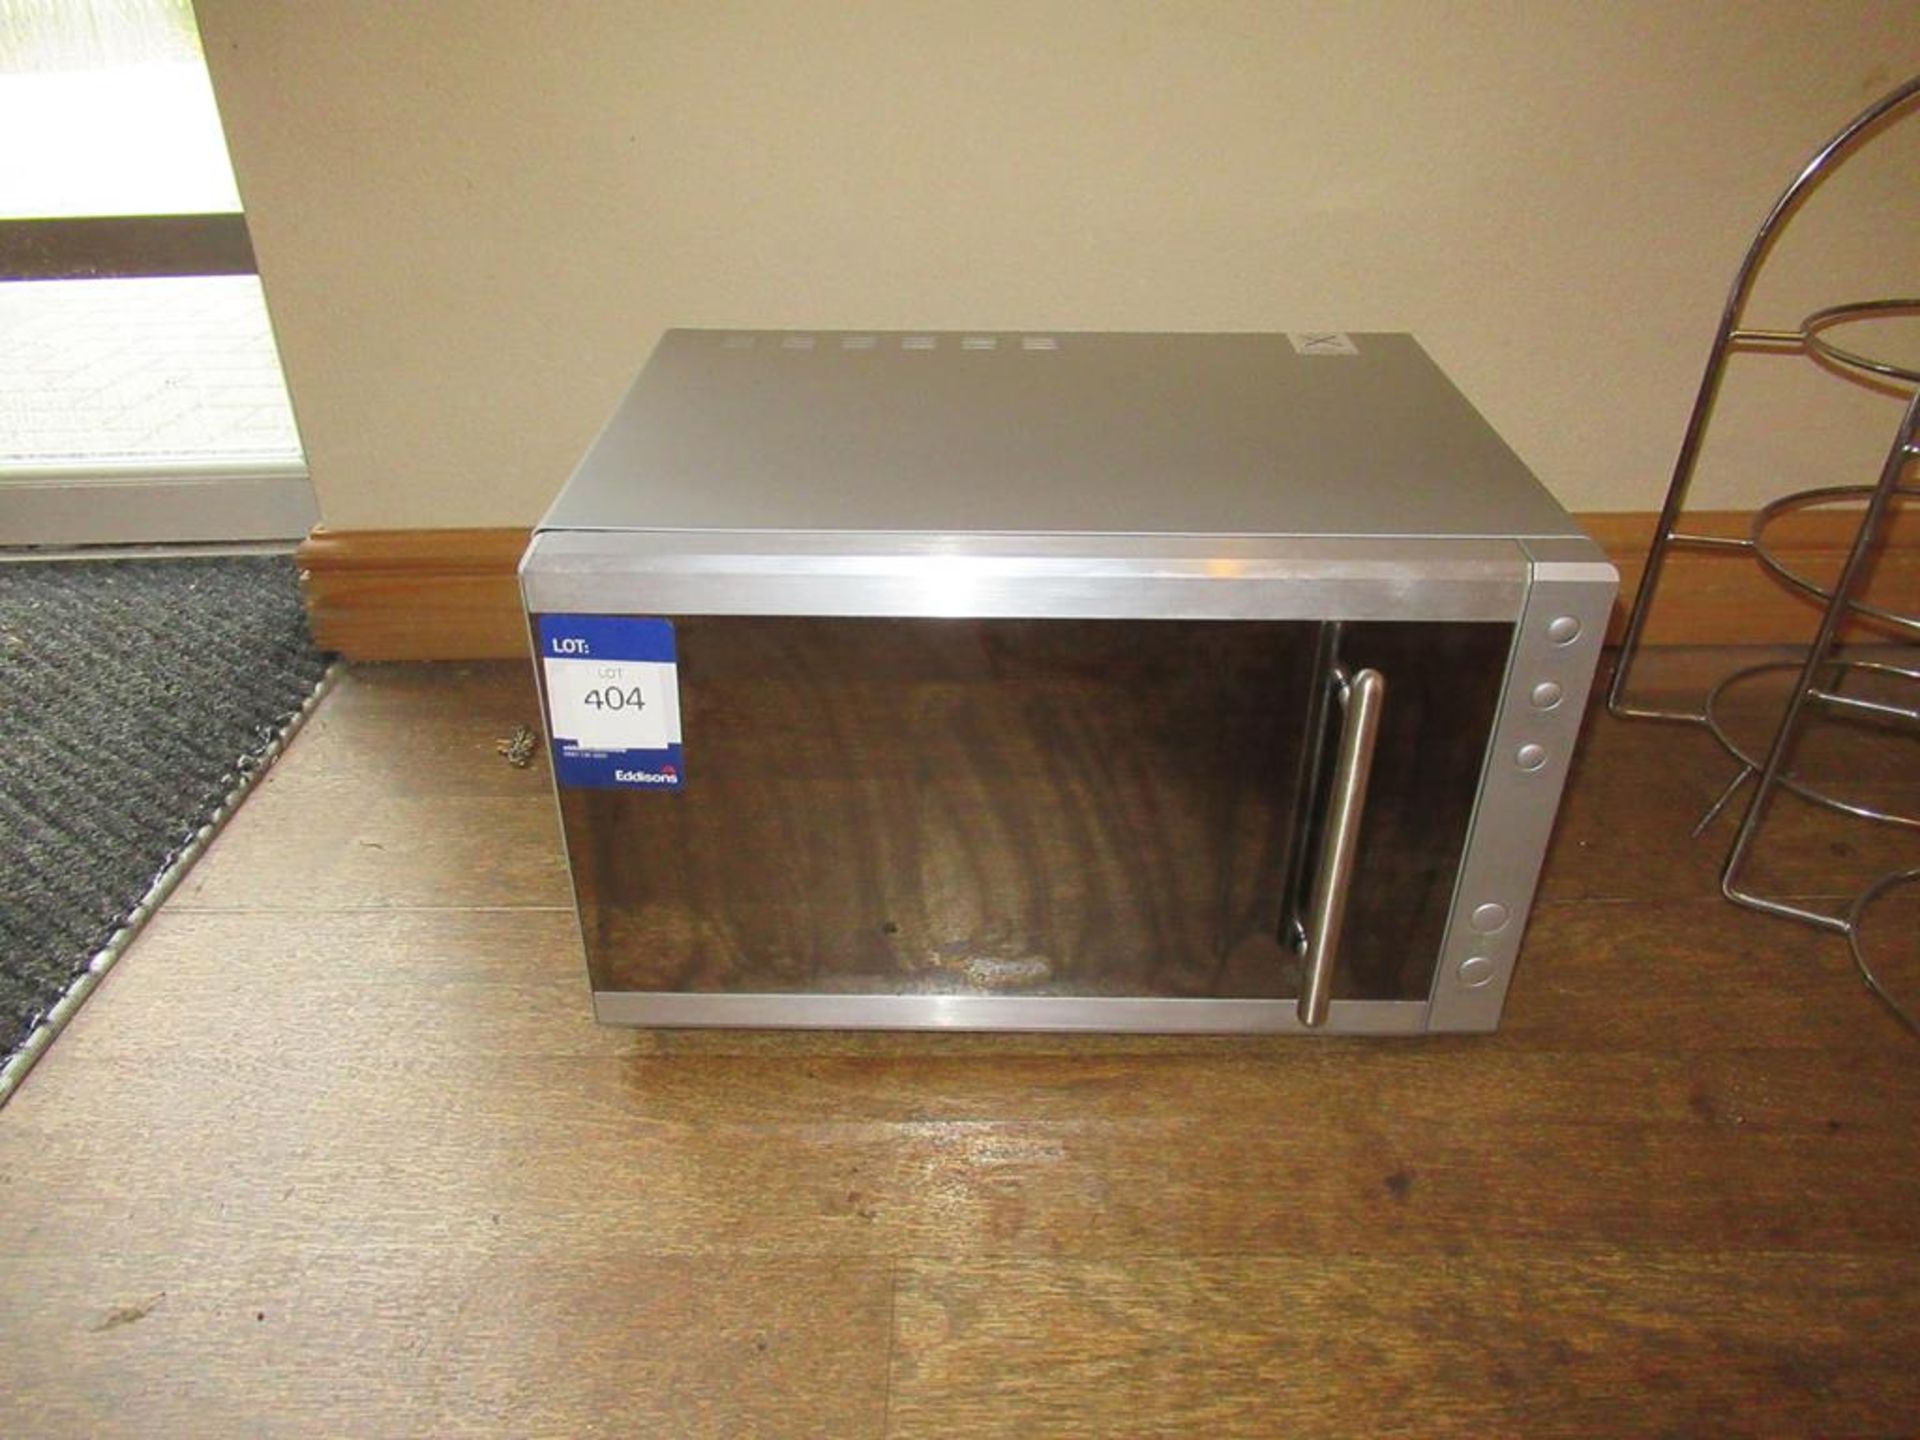 Kenwood Microwave with Chrome Cake Stands. - Image 2 of 3